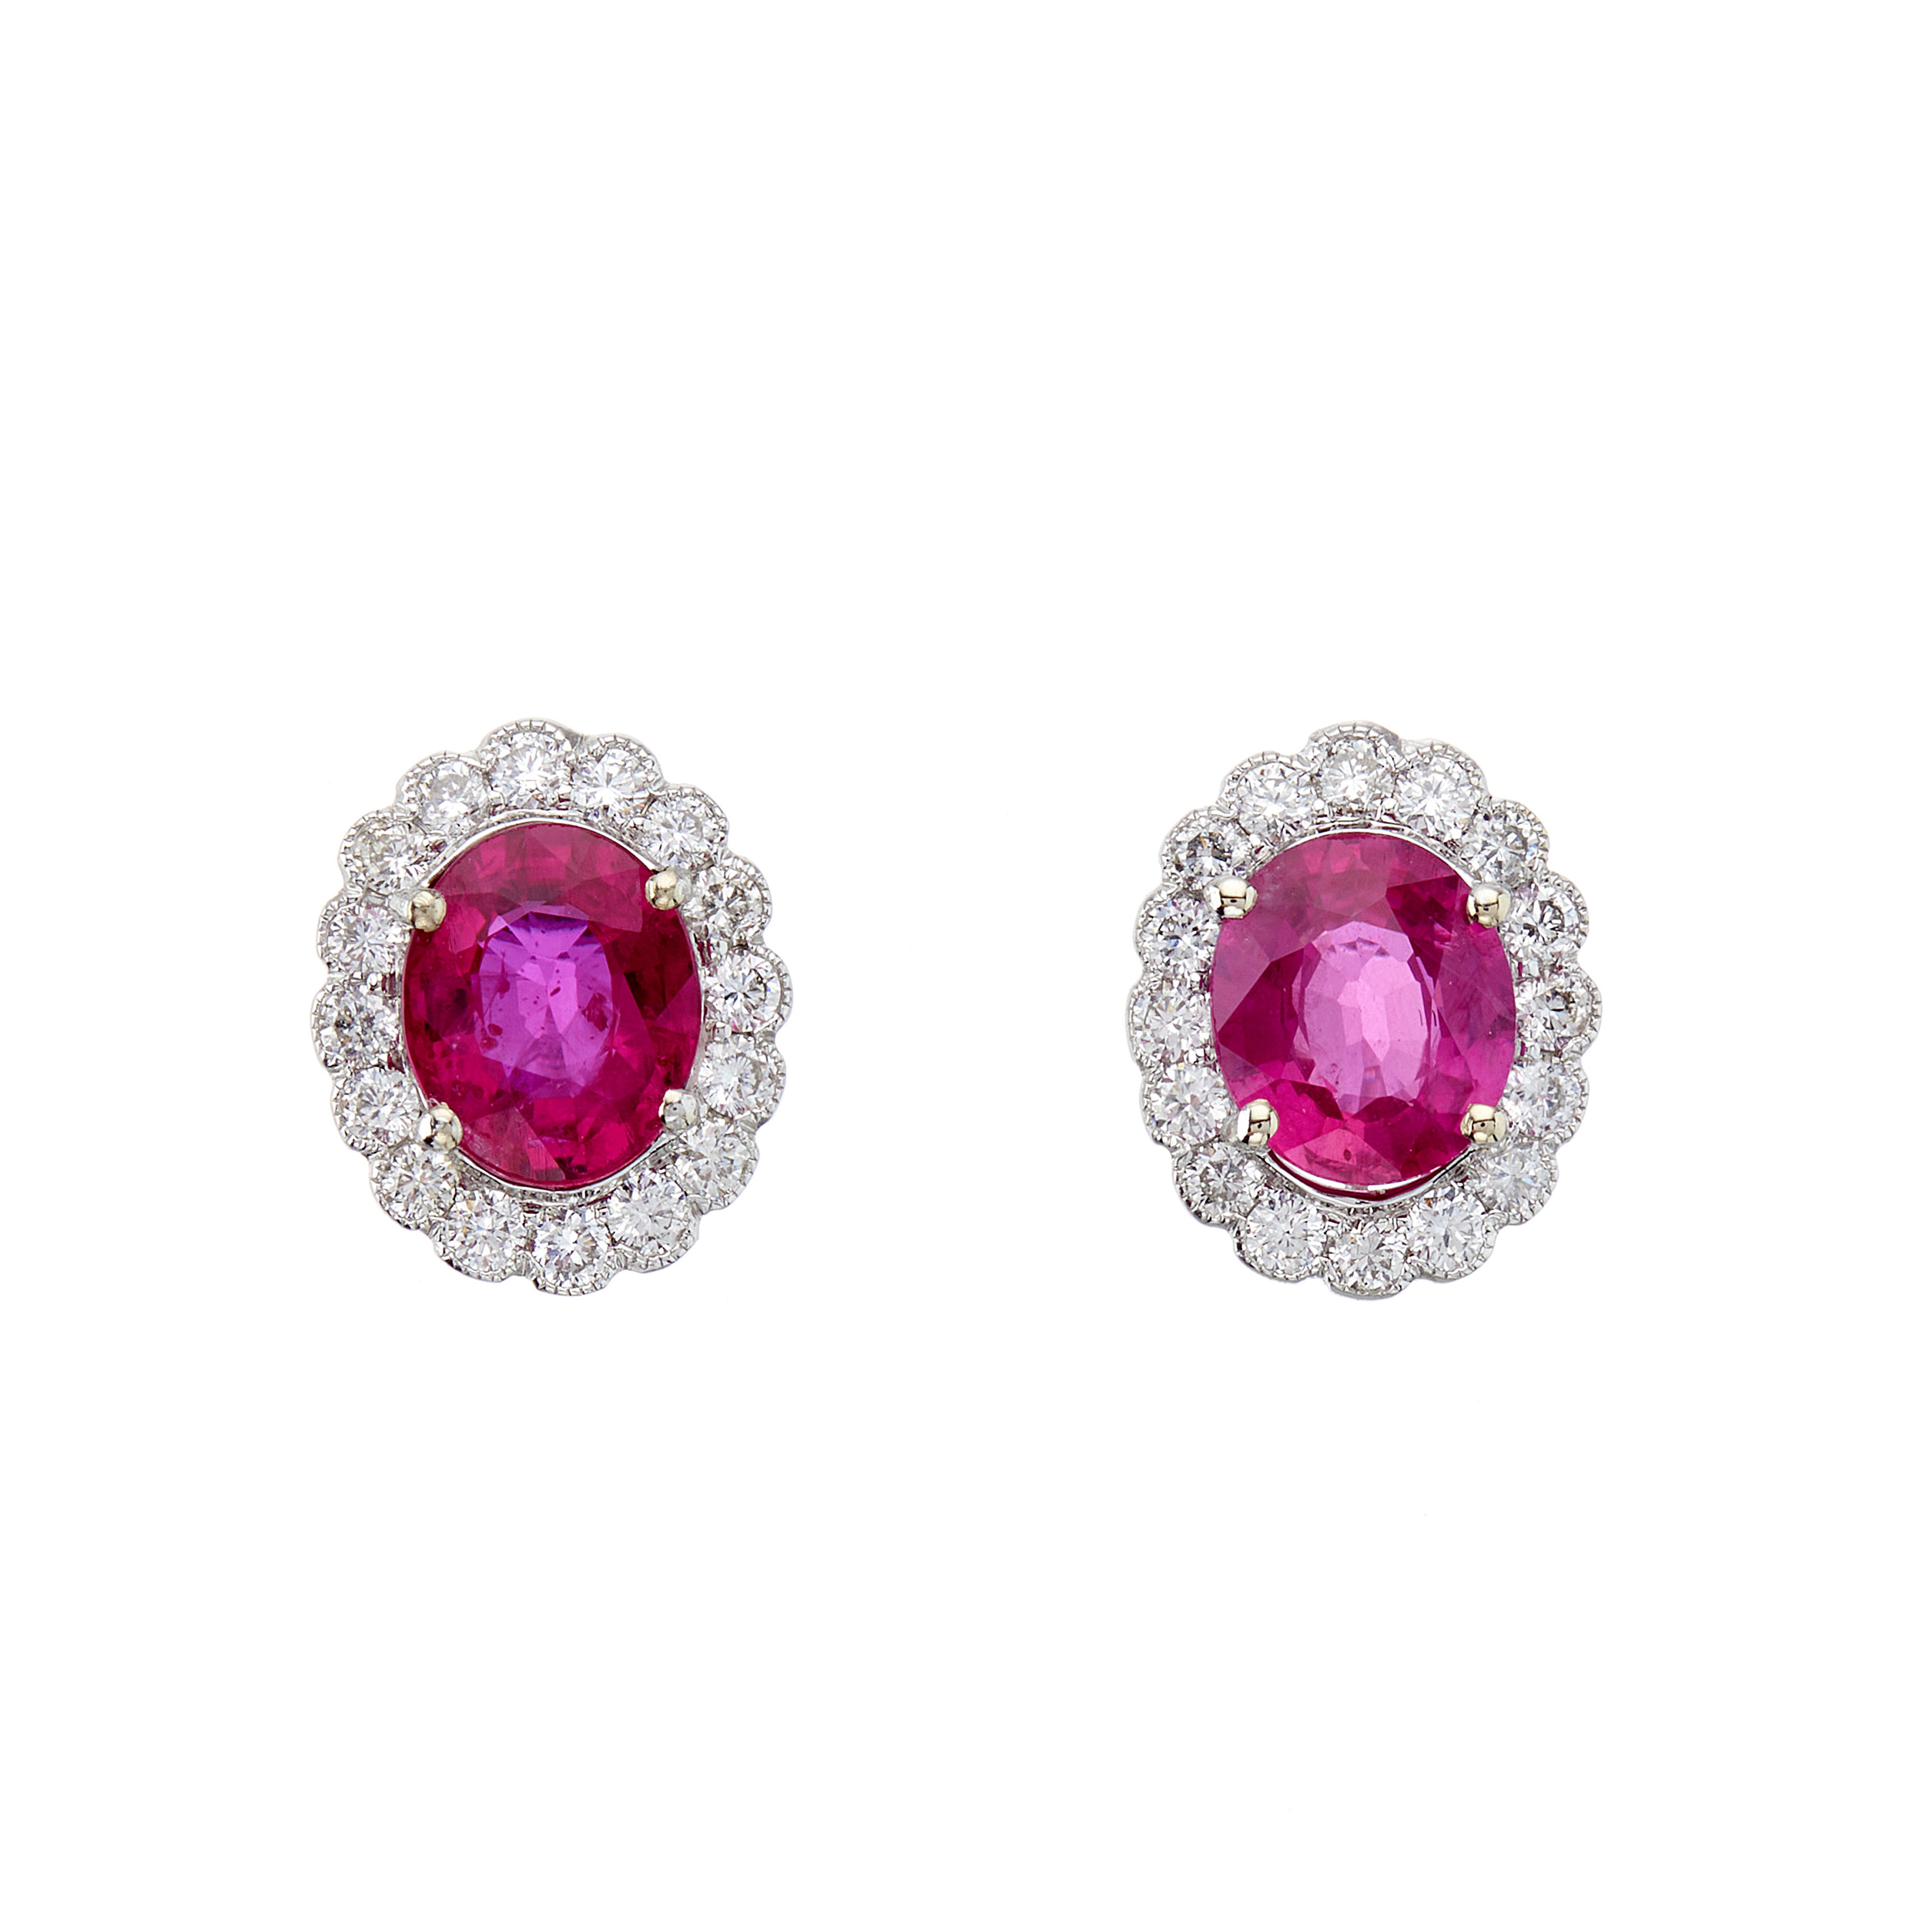 A pair of 18ct gold ruby and diamond cluster stud earrings